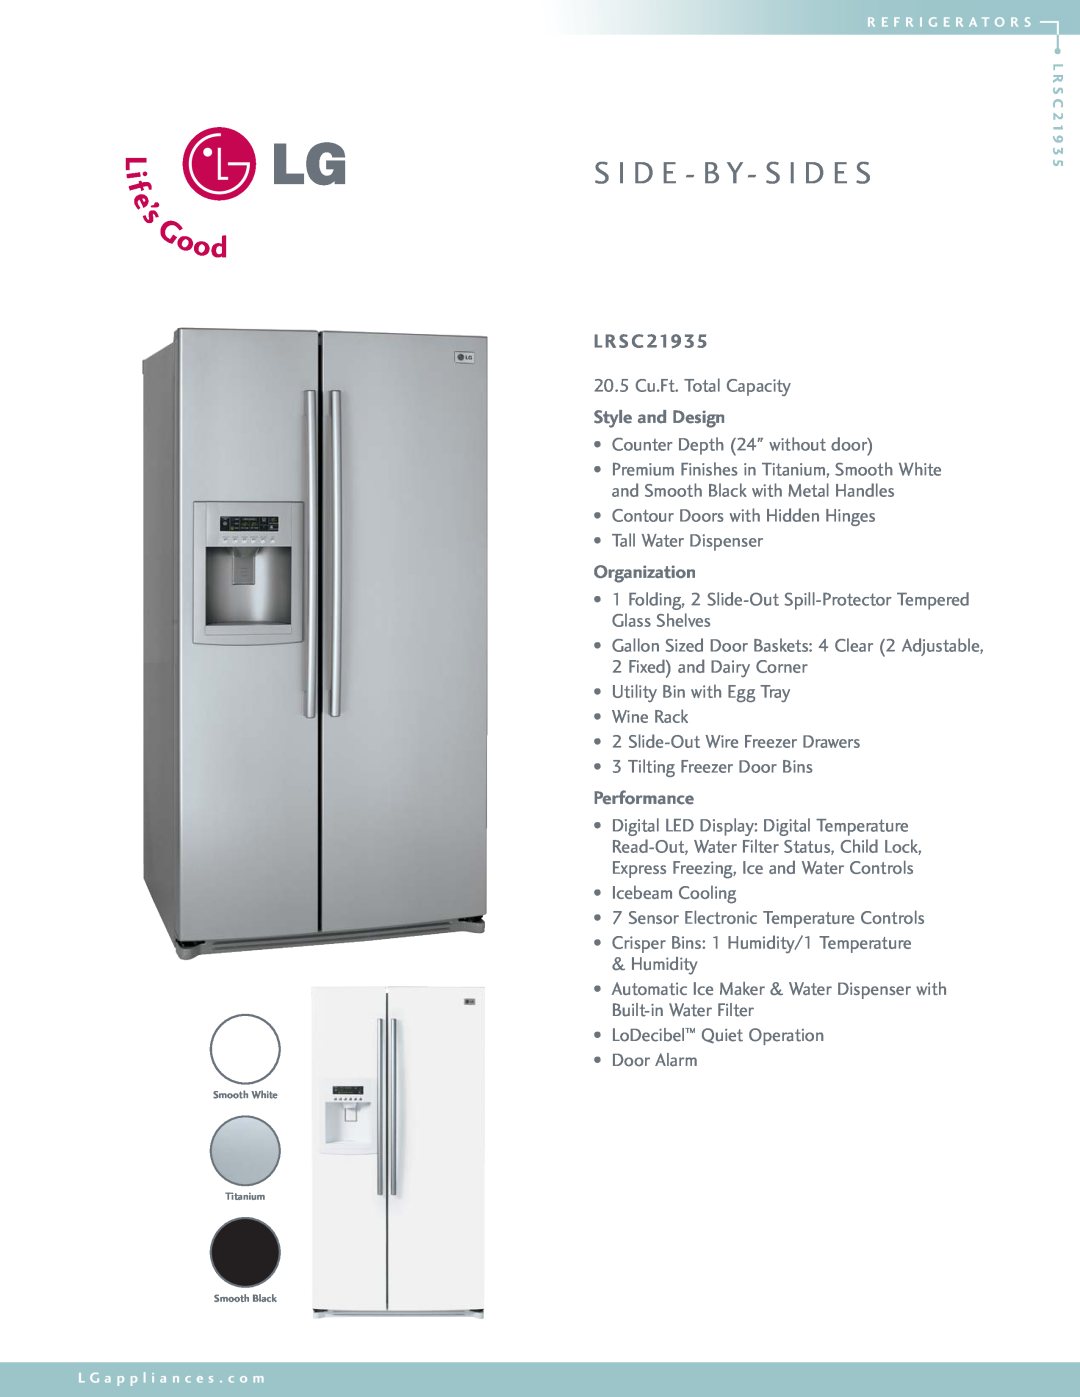 LG Electronics LRSC21935 manual L Rs C, S I D E - B Y- S I D E S, Style and Design, Organization, Performance 